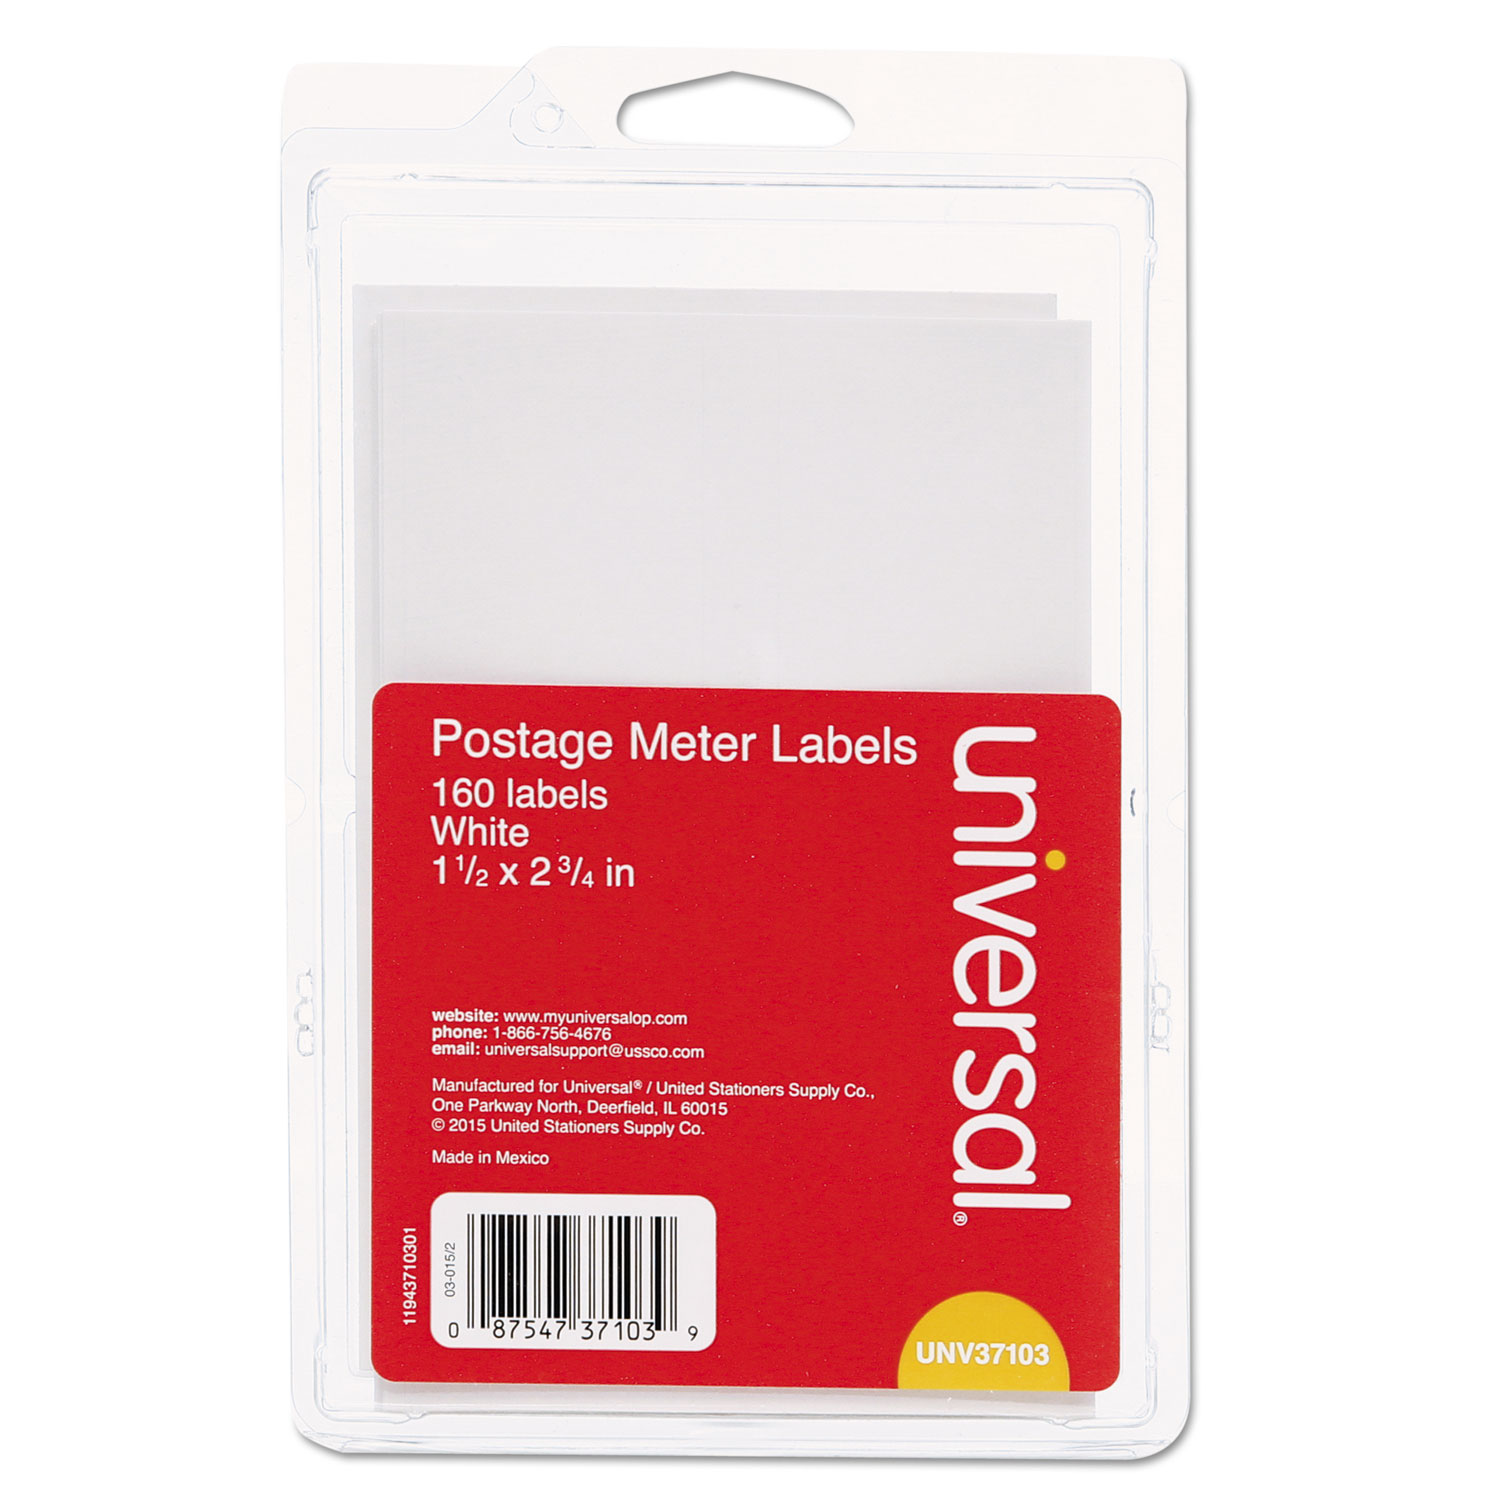  Universal UNV37103 Self-Adhesive Postage Meter Labels, 2.75 x 1.5 - 5.5 x 1.5, White, 4/Sheet, 40 Sheets/Pack (UNV37103) 